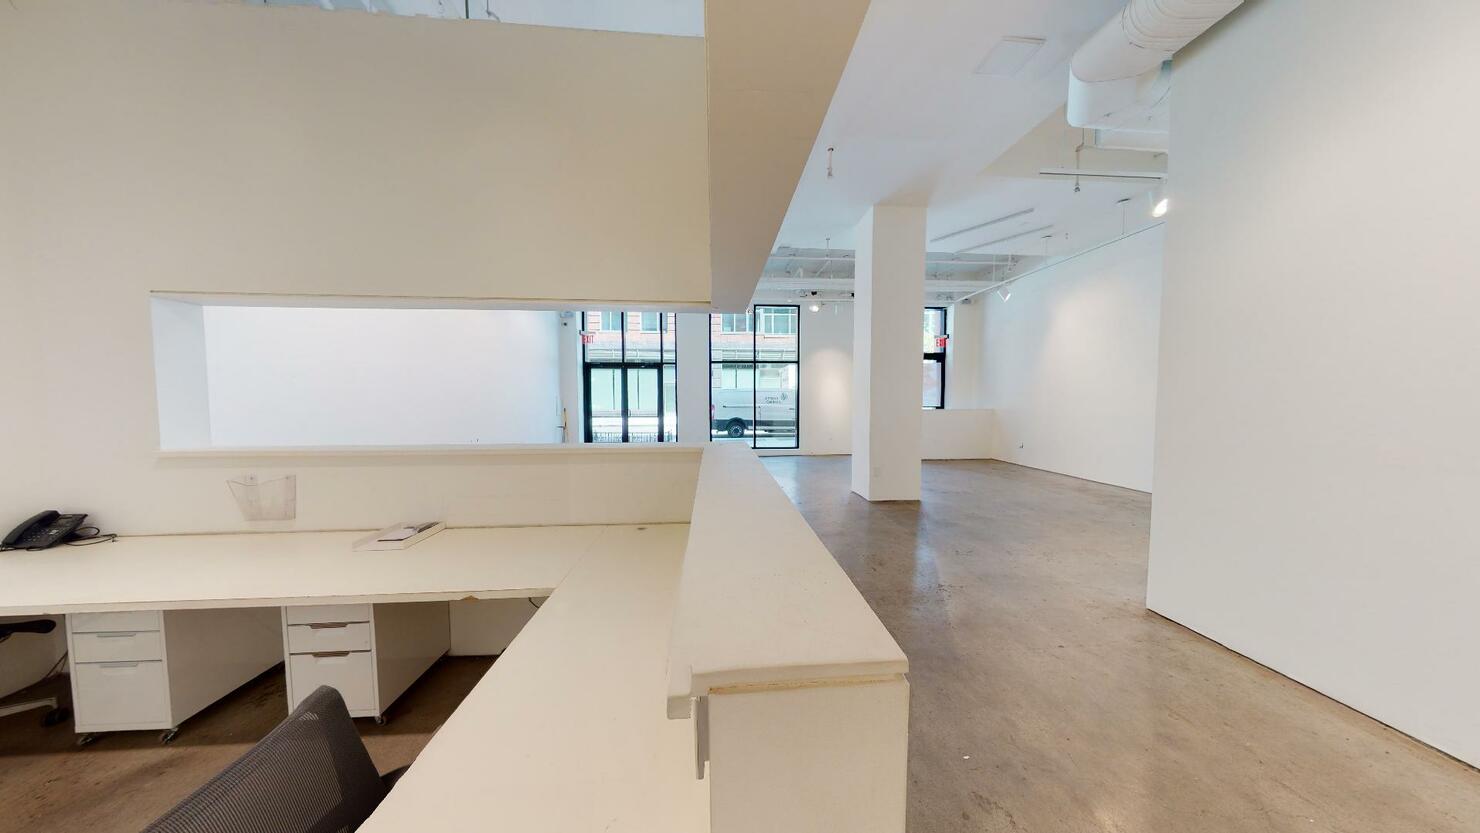 540 West 28th Street Office Space - Reception